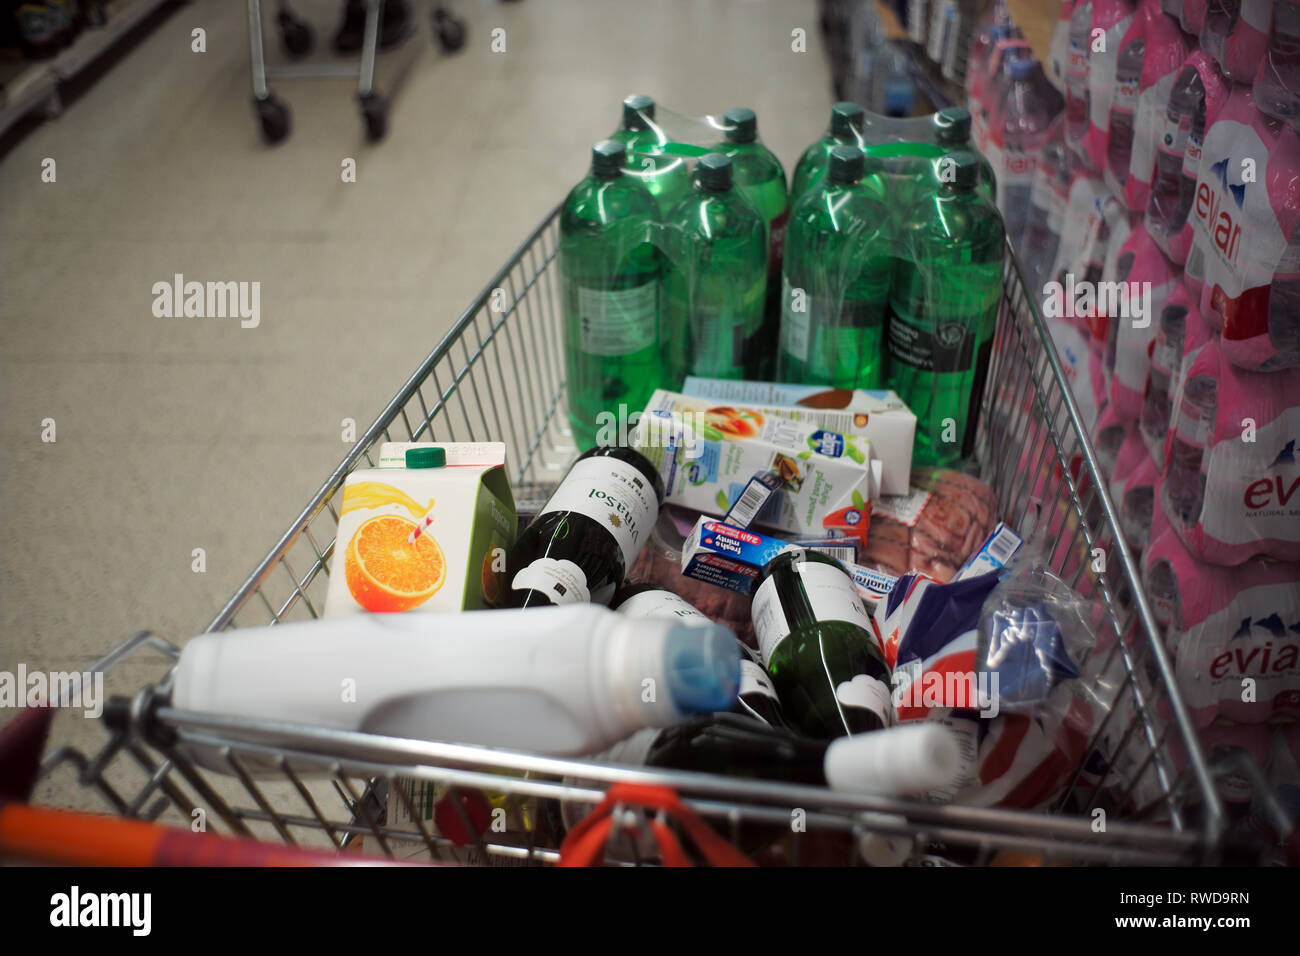 A shopping trolley full of shopping stands in a supermarket aisle, in London, Britain March 3, 2019. John Voos - TSL Stock Photo